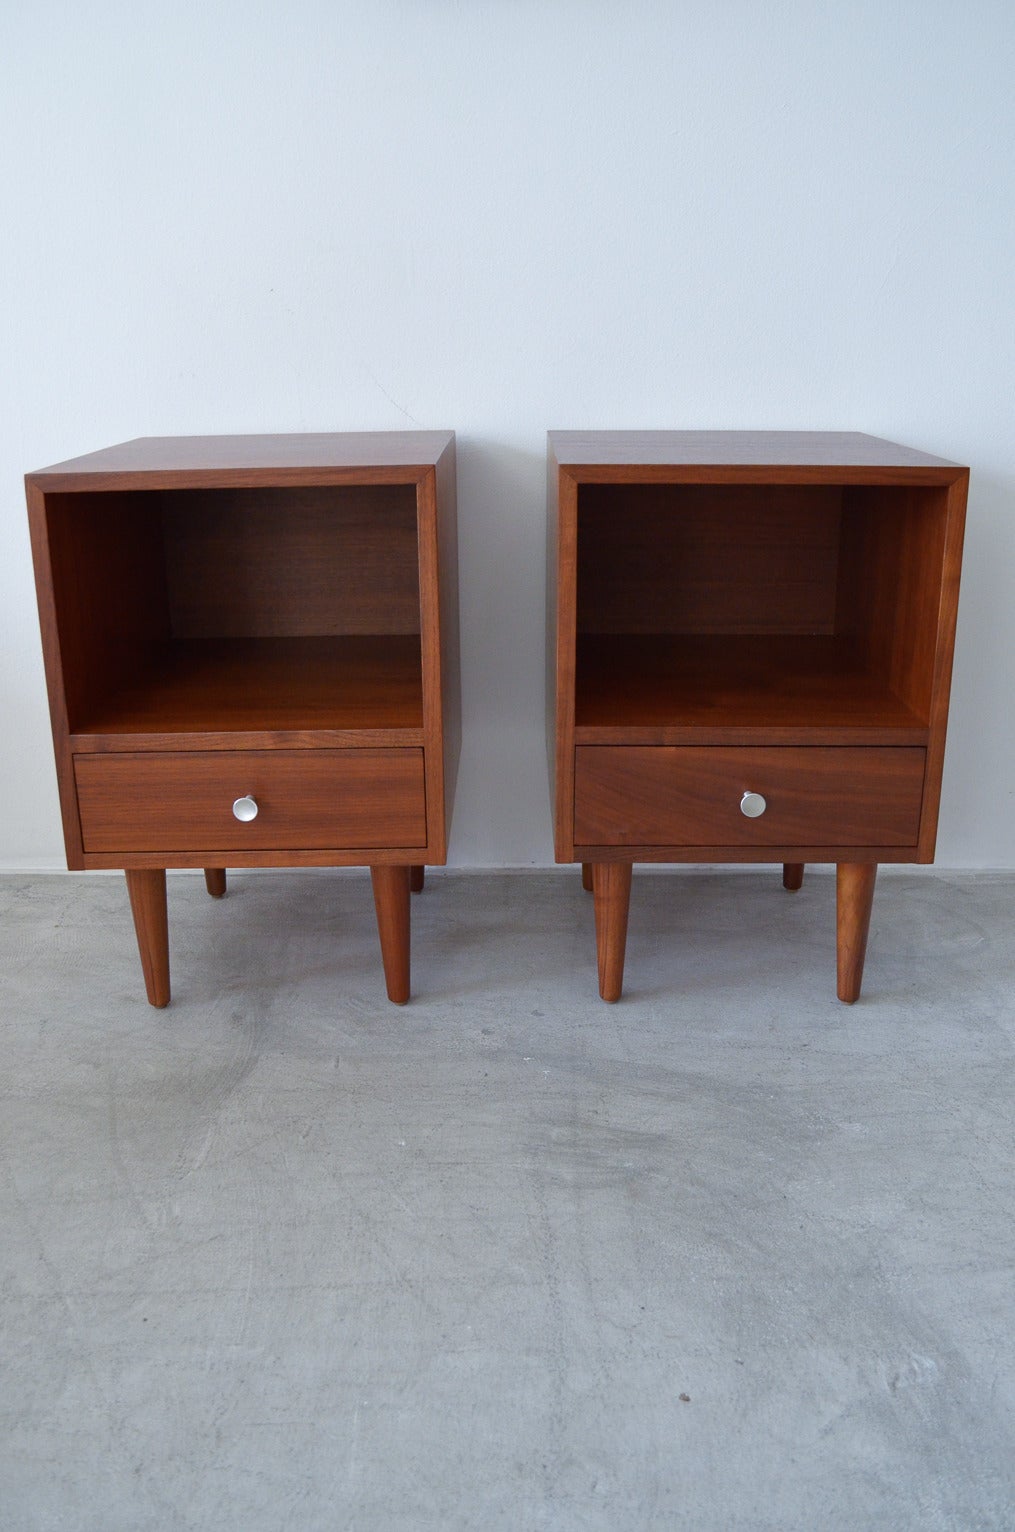 Rare pair of Milo Baughman for Glenn of California end tables or nightstands in walnut with original aluminum hardware.

Professionally restored to showroom perfect condition.  Simple and classic lines.  Perfect for just about anywhere. Sold as a